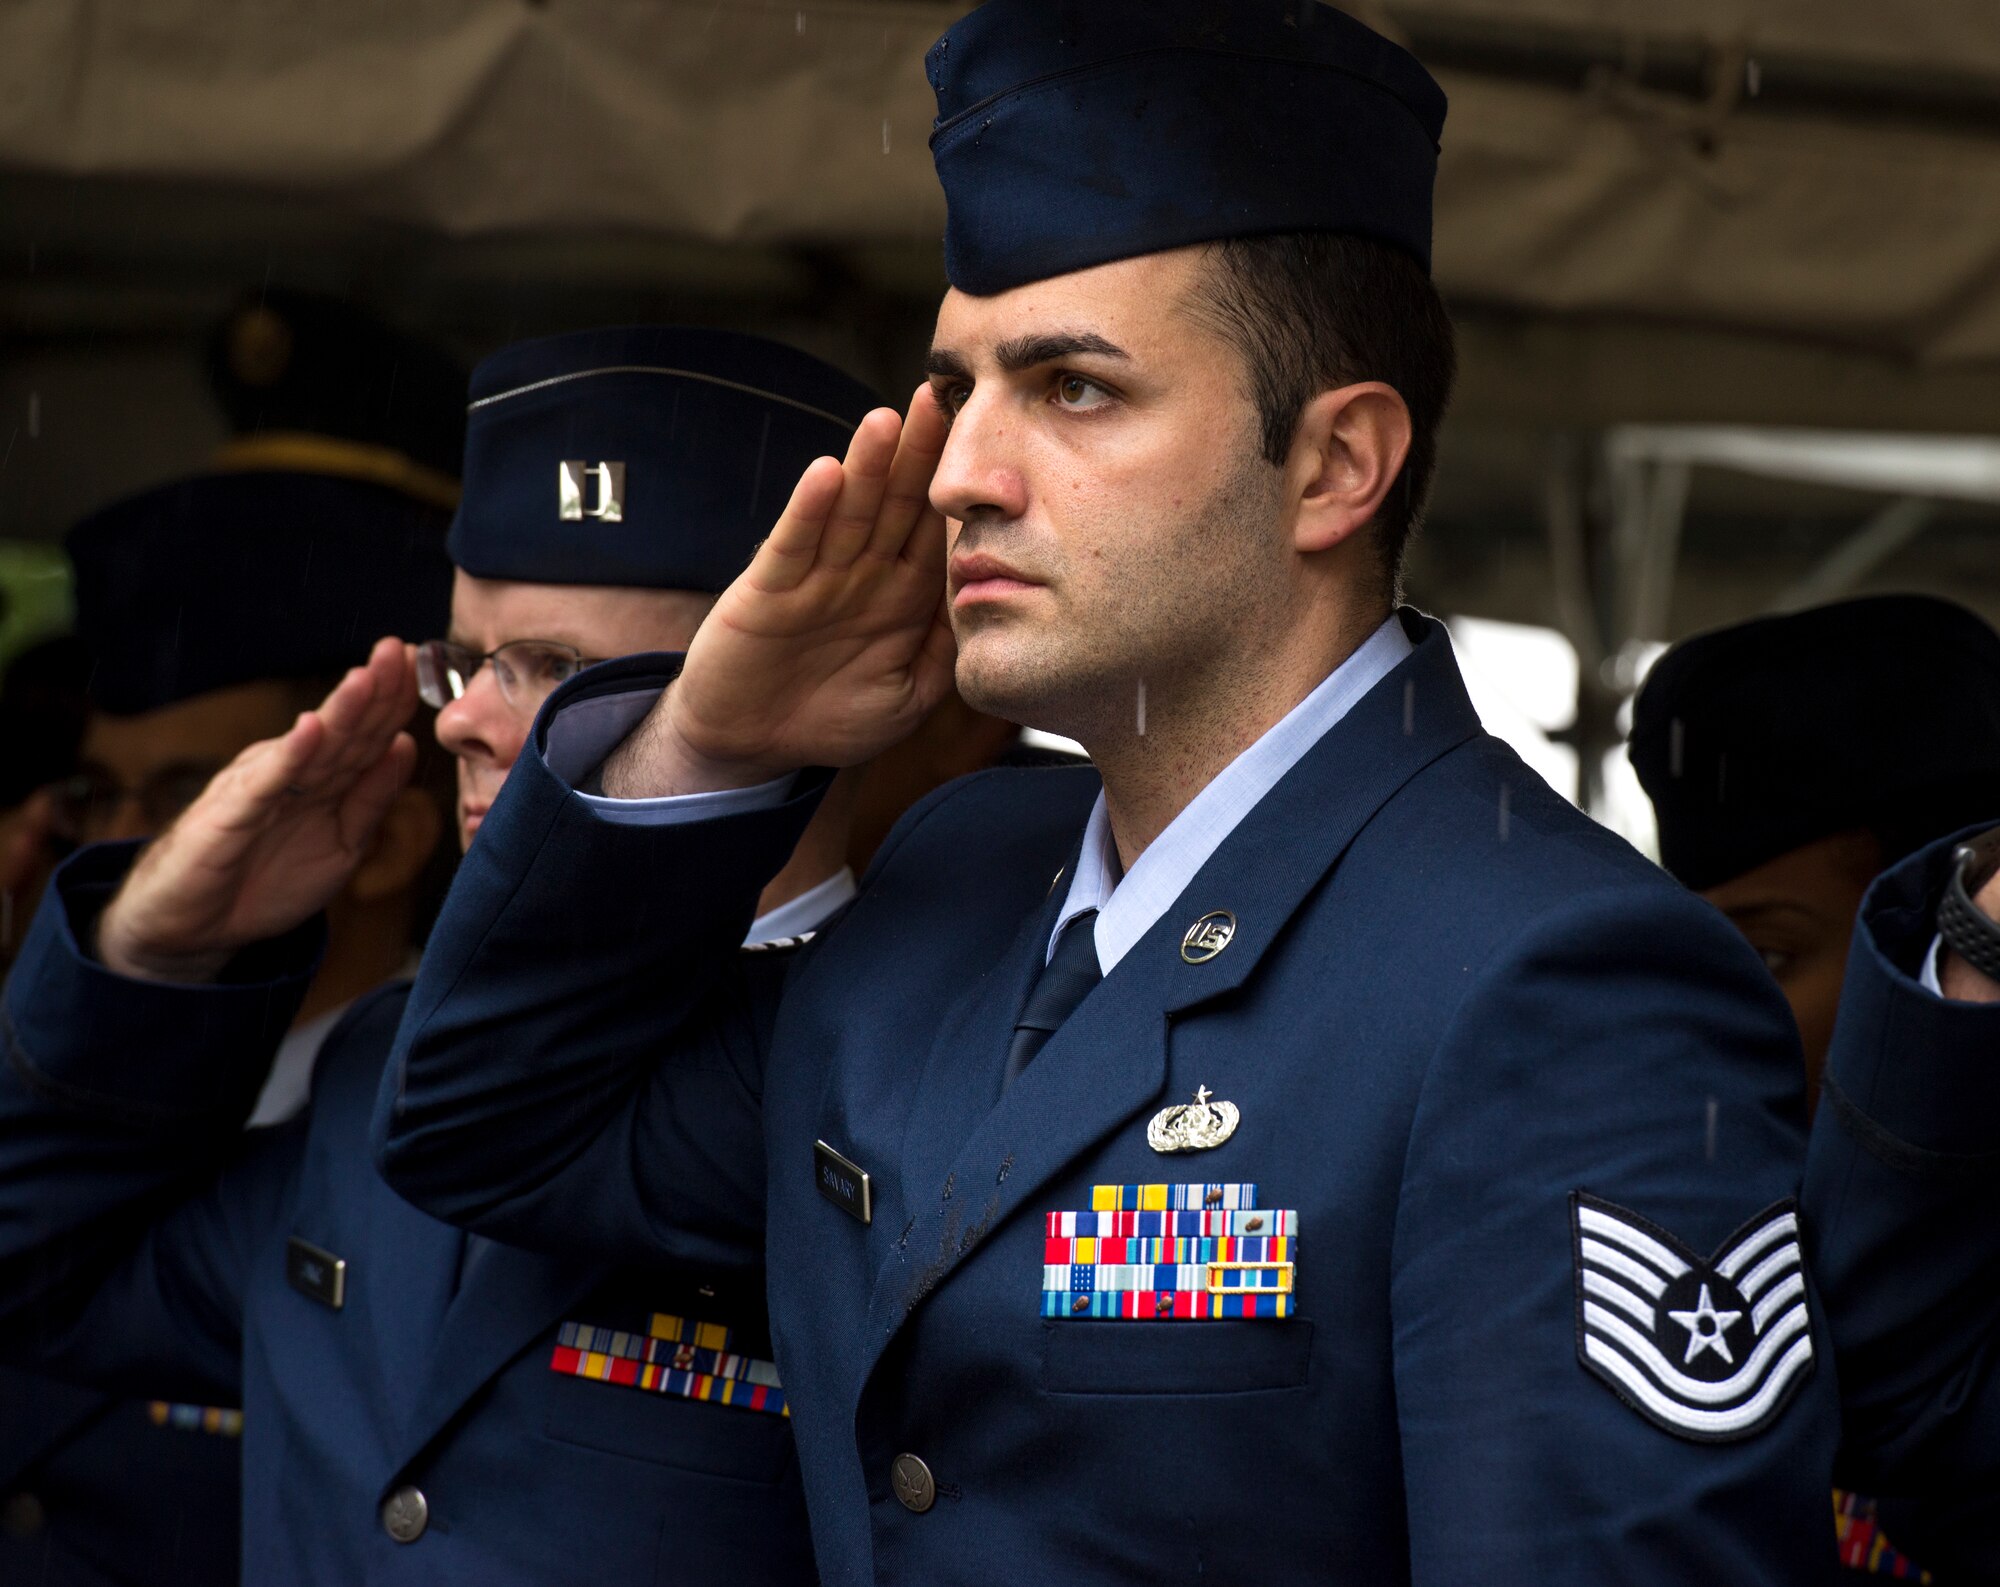 U.S. Air Force Tech. Sgt. Anthony Savary, 730 Air Mobility Squadron communications administrator, salutes during the playing of the National Anthem